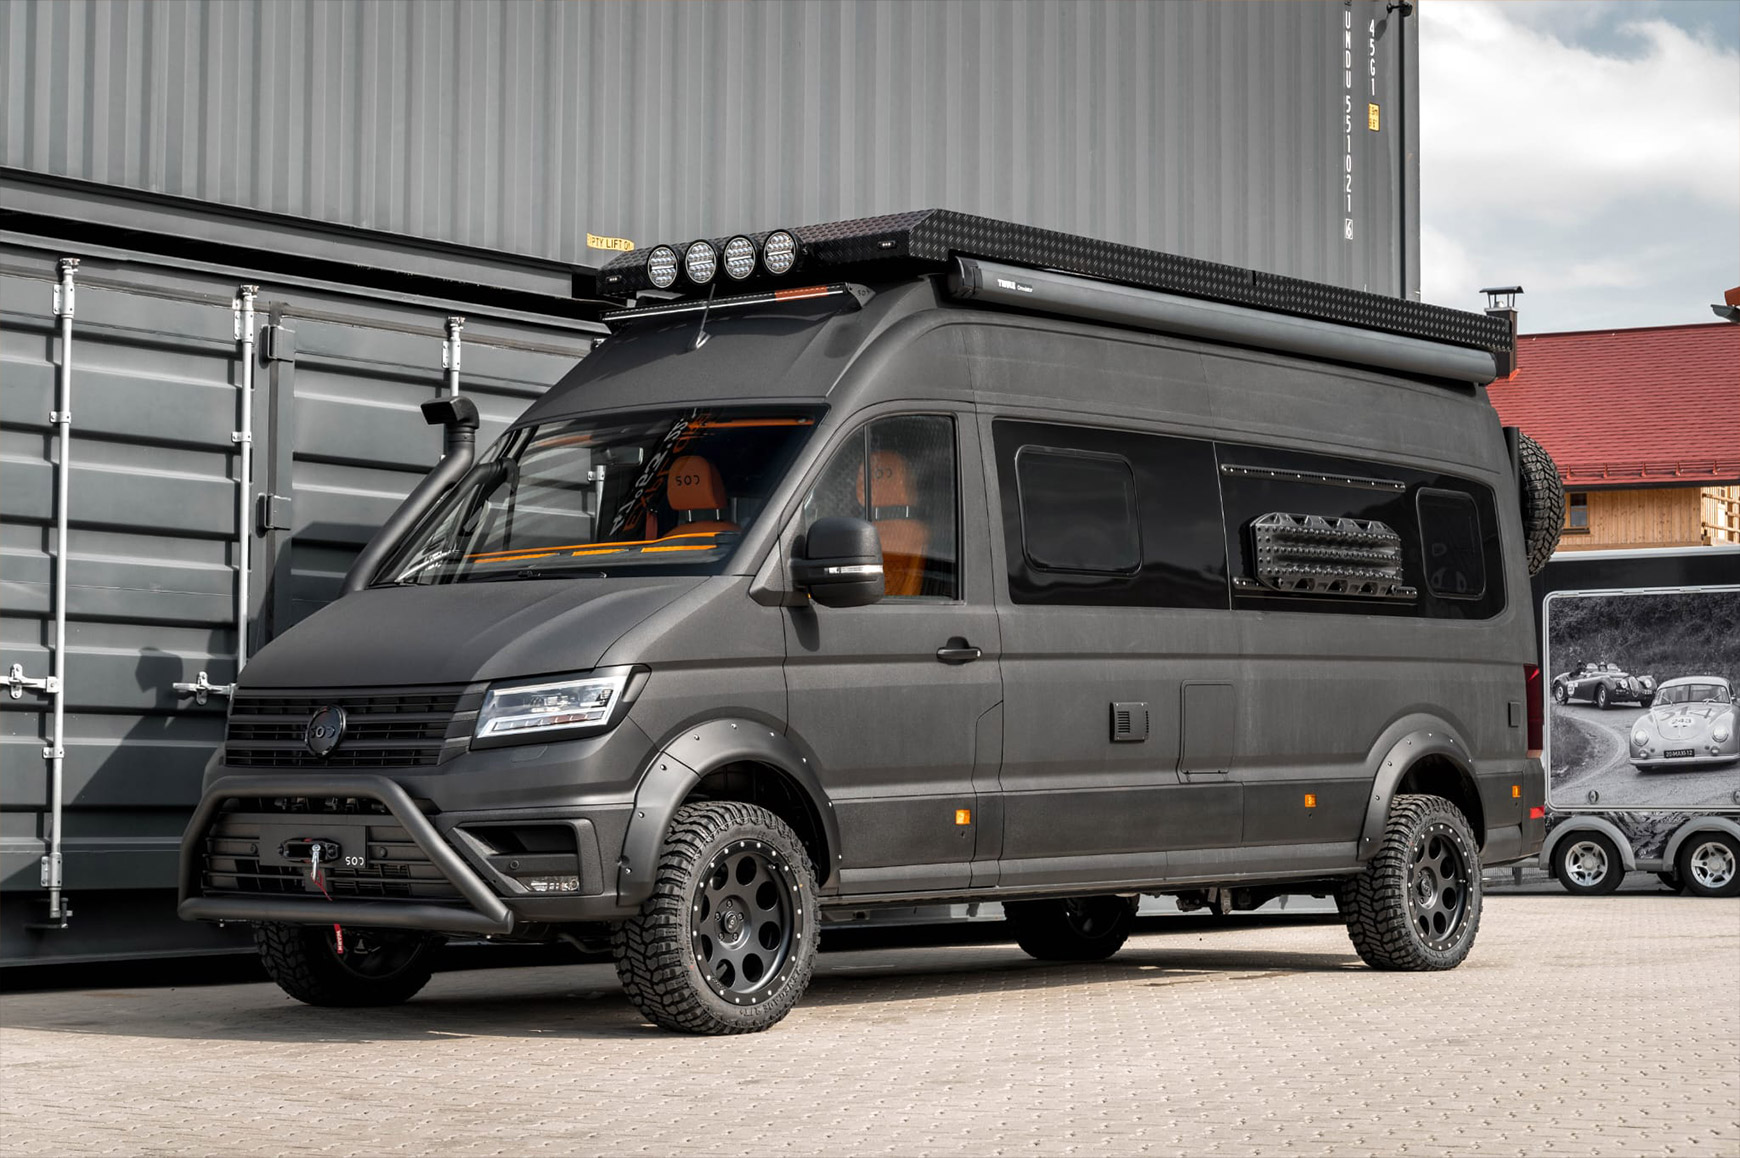 SOD Base Level3 Plus (2022) VW Crafter Campingbus